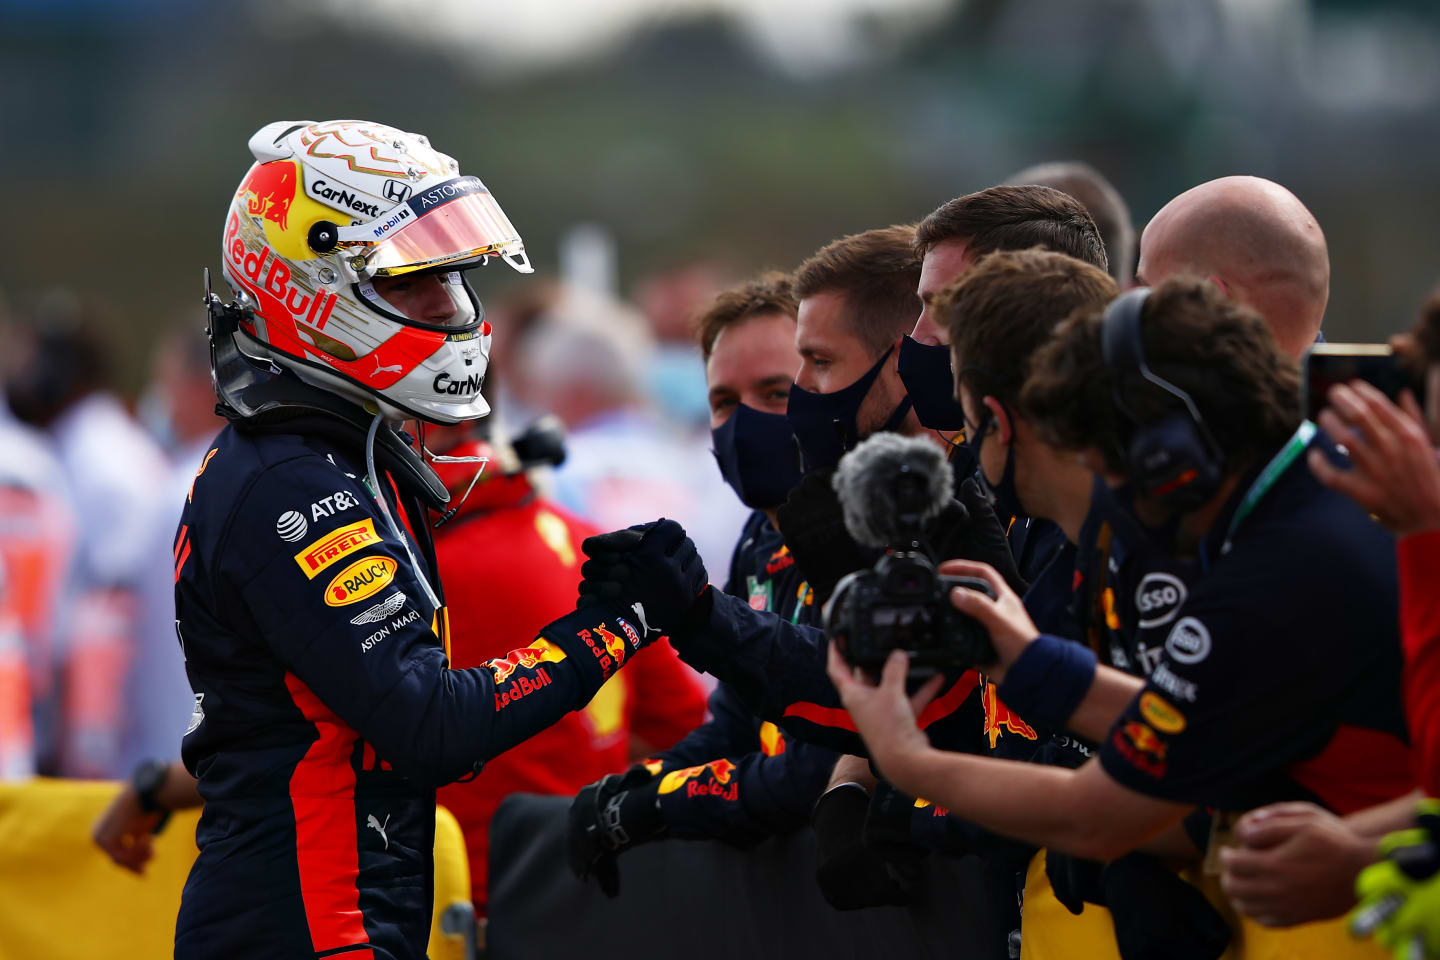 NORTHAMPTON, ENGLAND - AUGUST 02: Second placed Max Verstappen of Netherlands and Red Bull Racing celebrates in parc ferme during the F1 Grand Prix of Great Britain at Silverstone on August 02, 2020 in Northampton, England. (Photo by Mark Thompson/Getty Images)